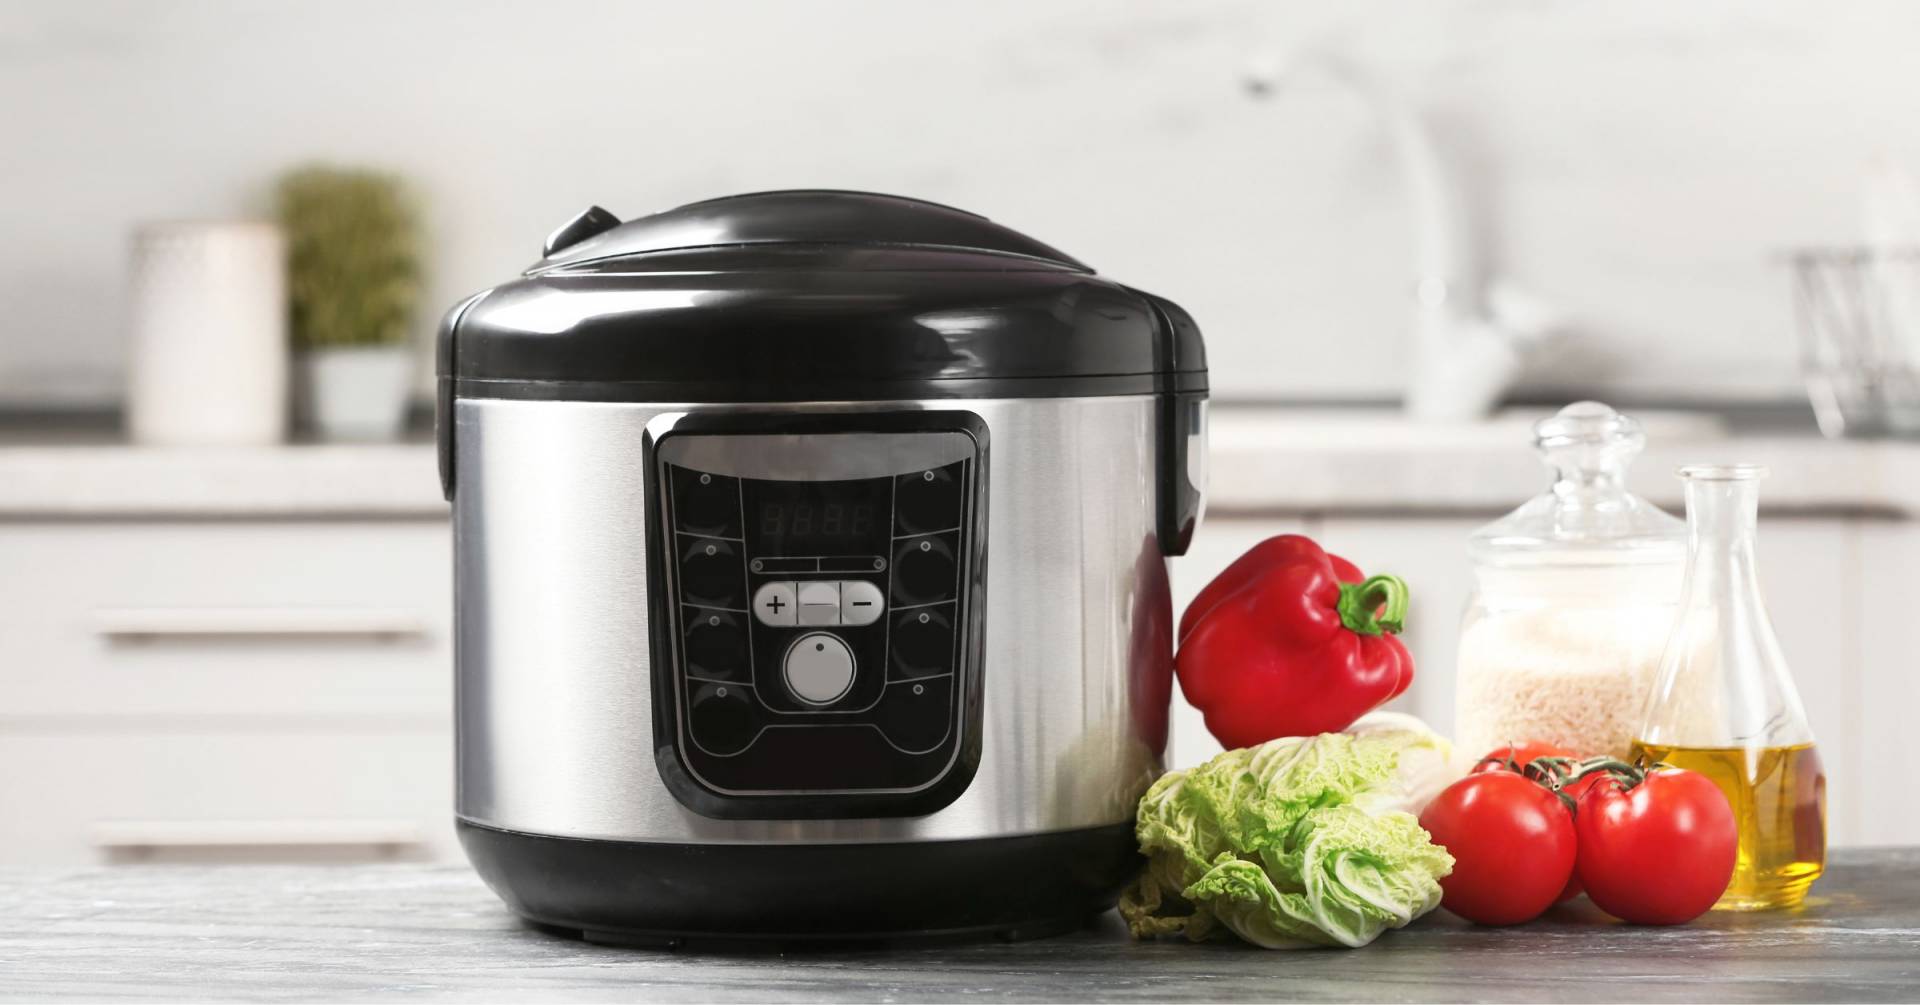 Best Pressure Cooker And Air Fryer 1691763283 1920 60 